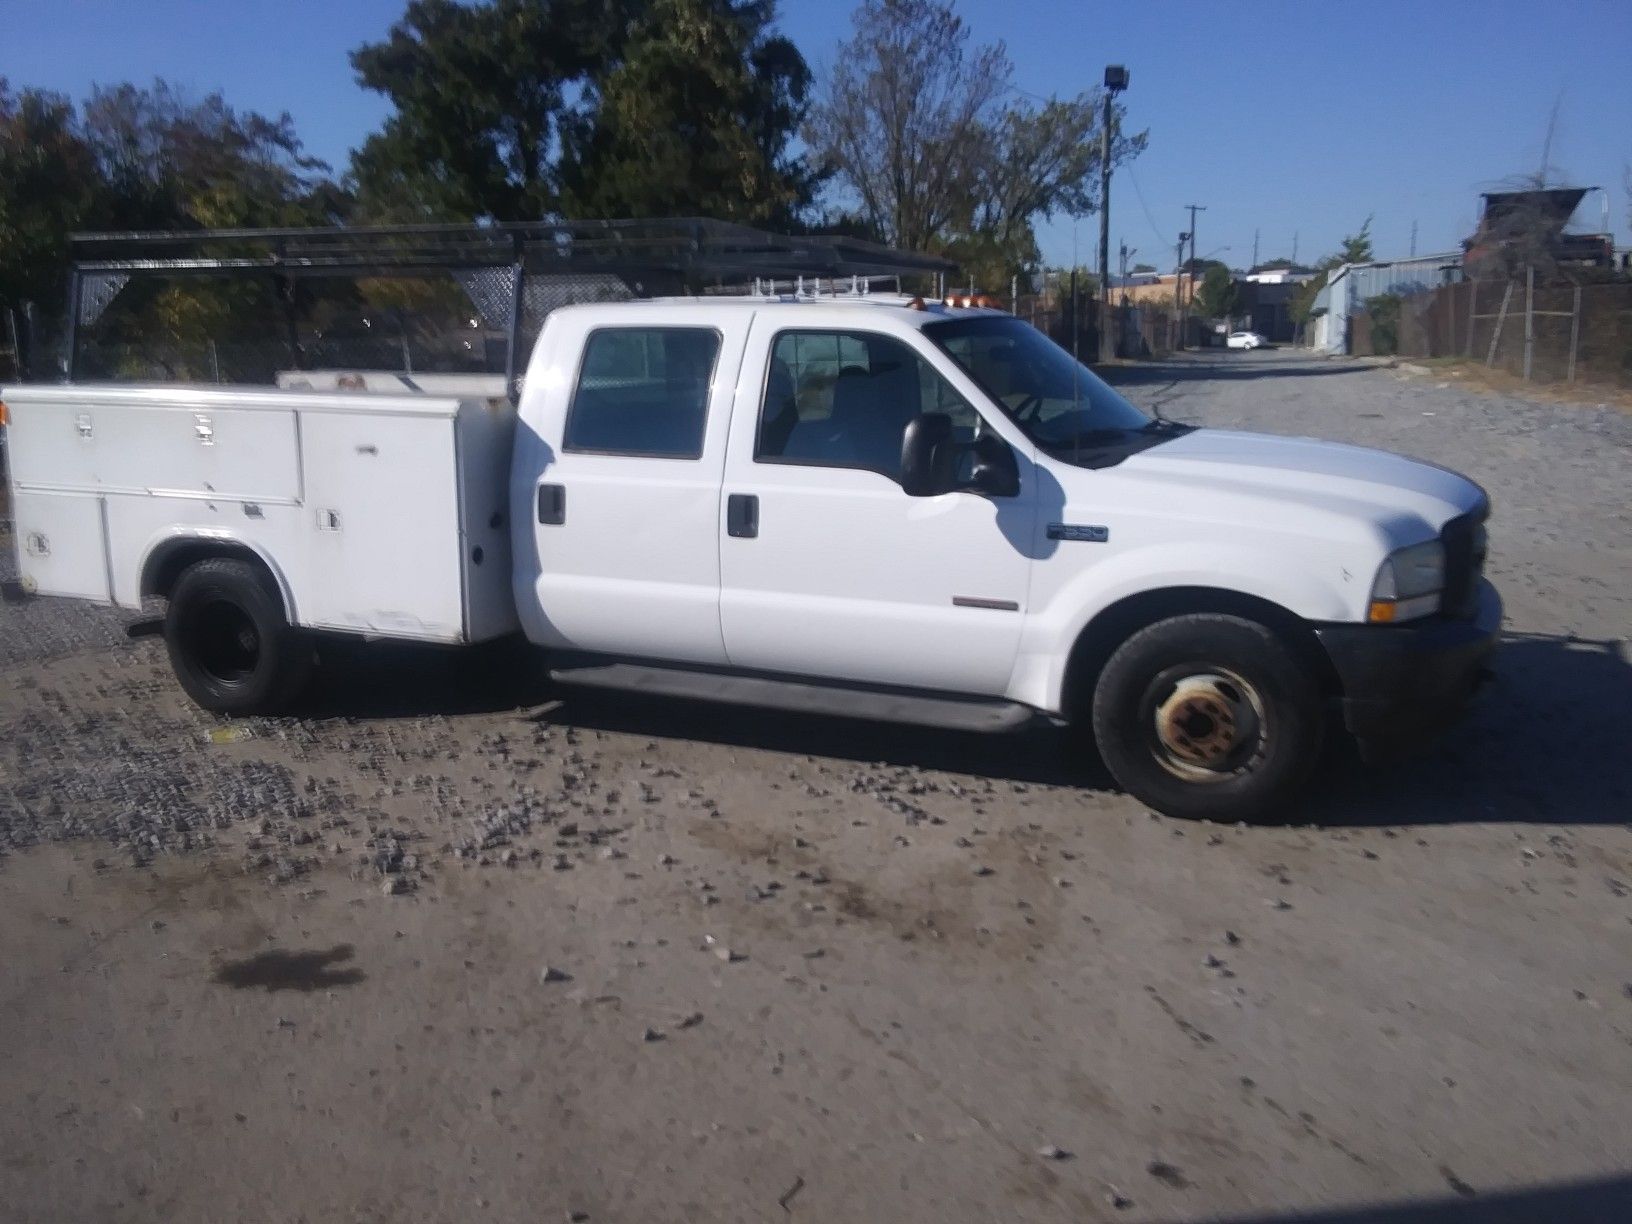 2003 Ford F350 200k miles 6.0 Powerstroke Turbo Diesel runs and drives!!! Ready to work!!!!